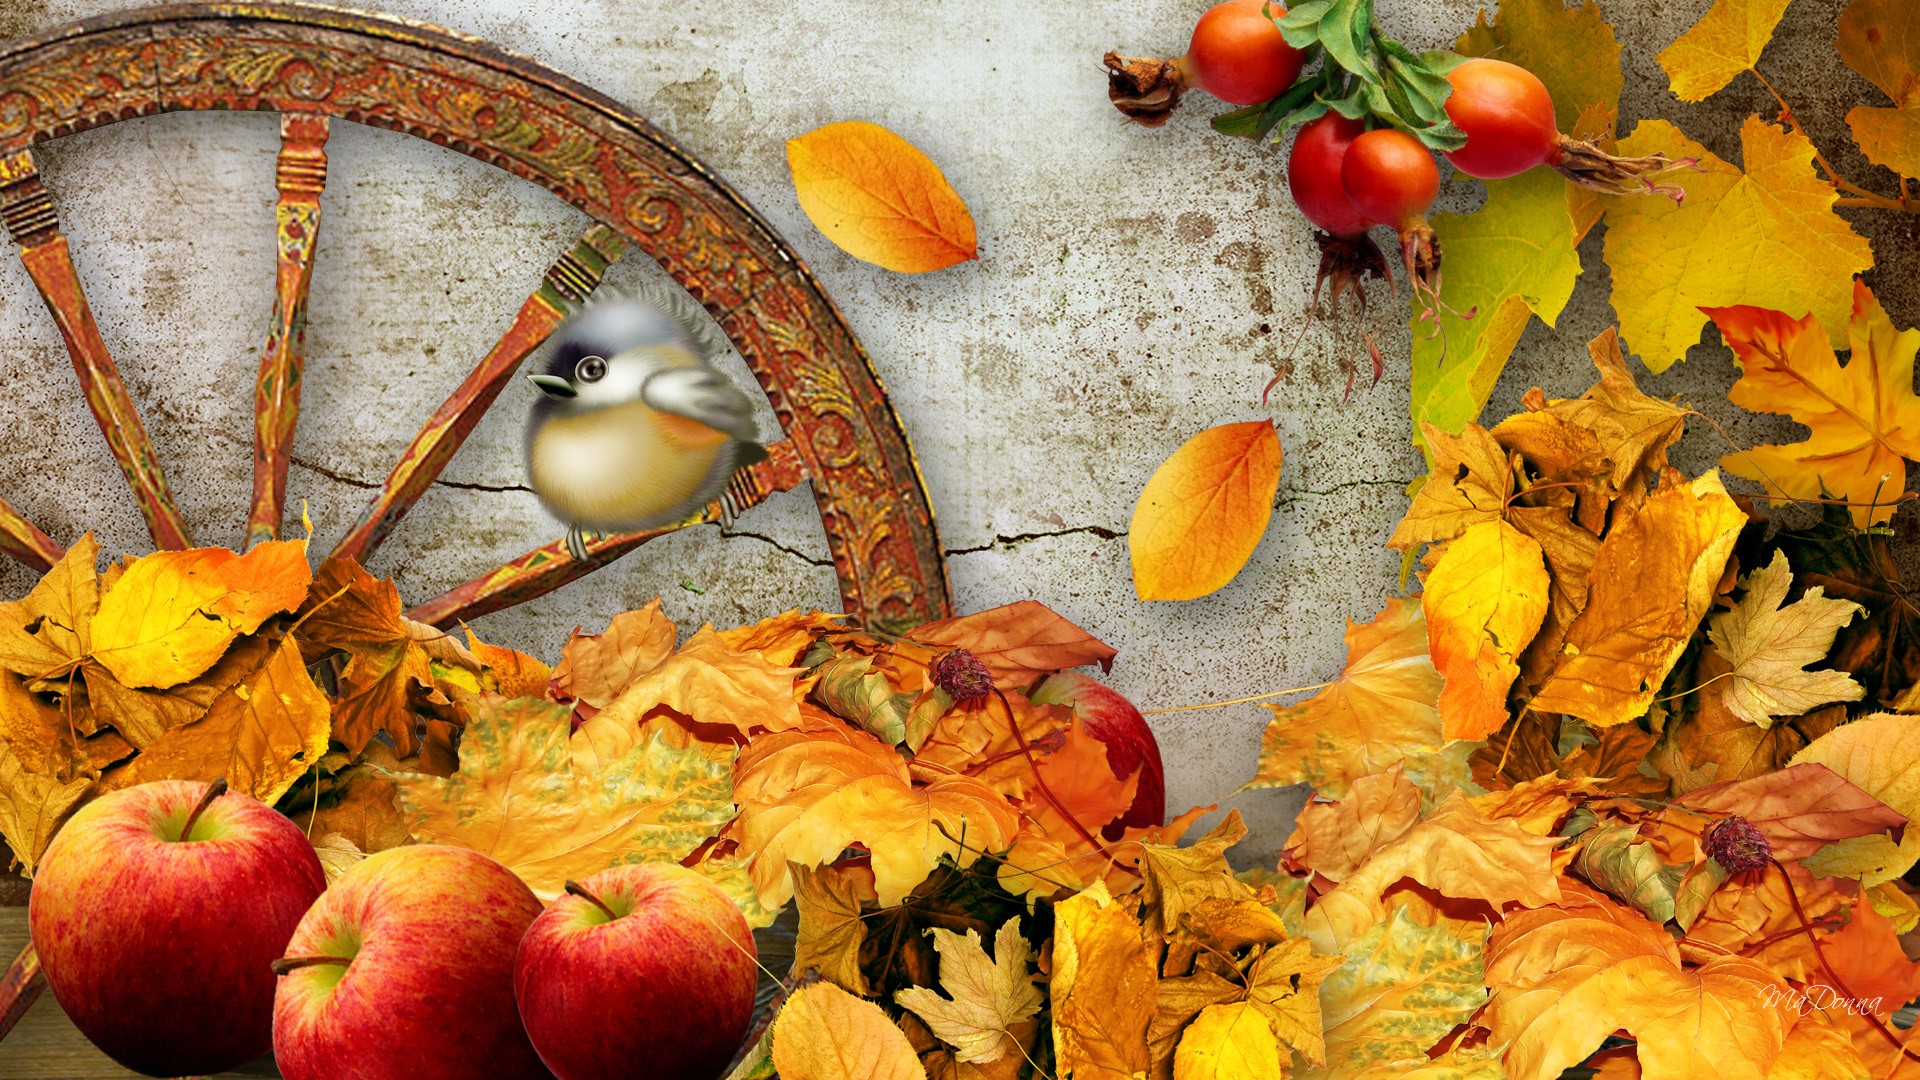 Fall Harvest HD Wallpaper For Mac Amazing Wallpaperz